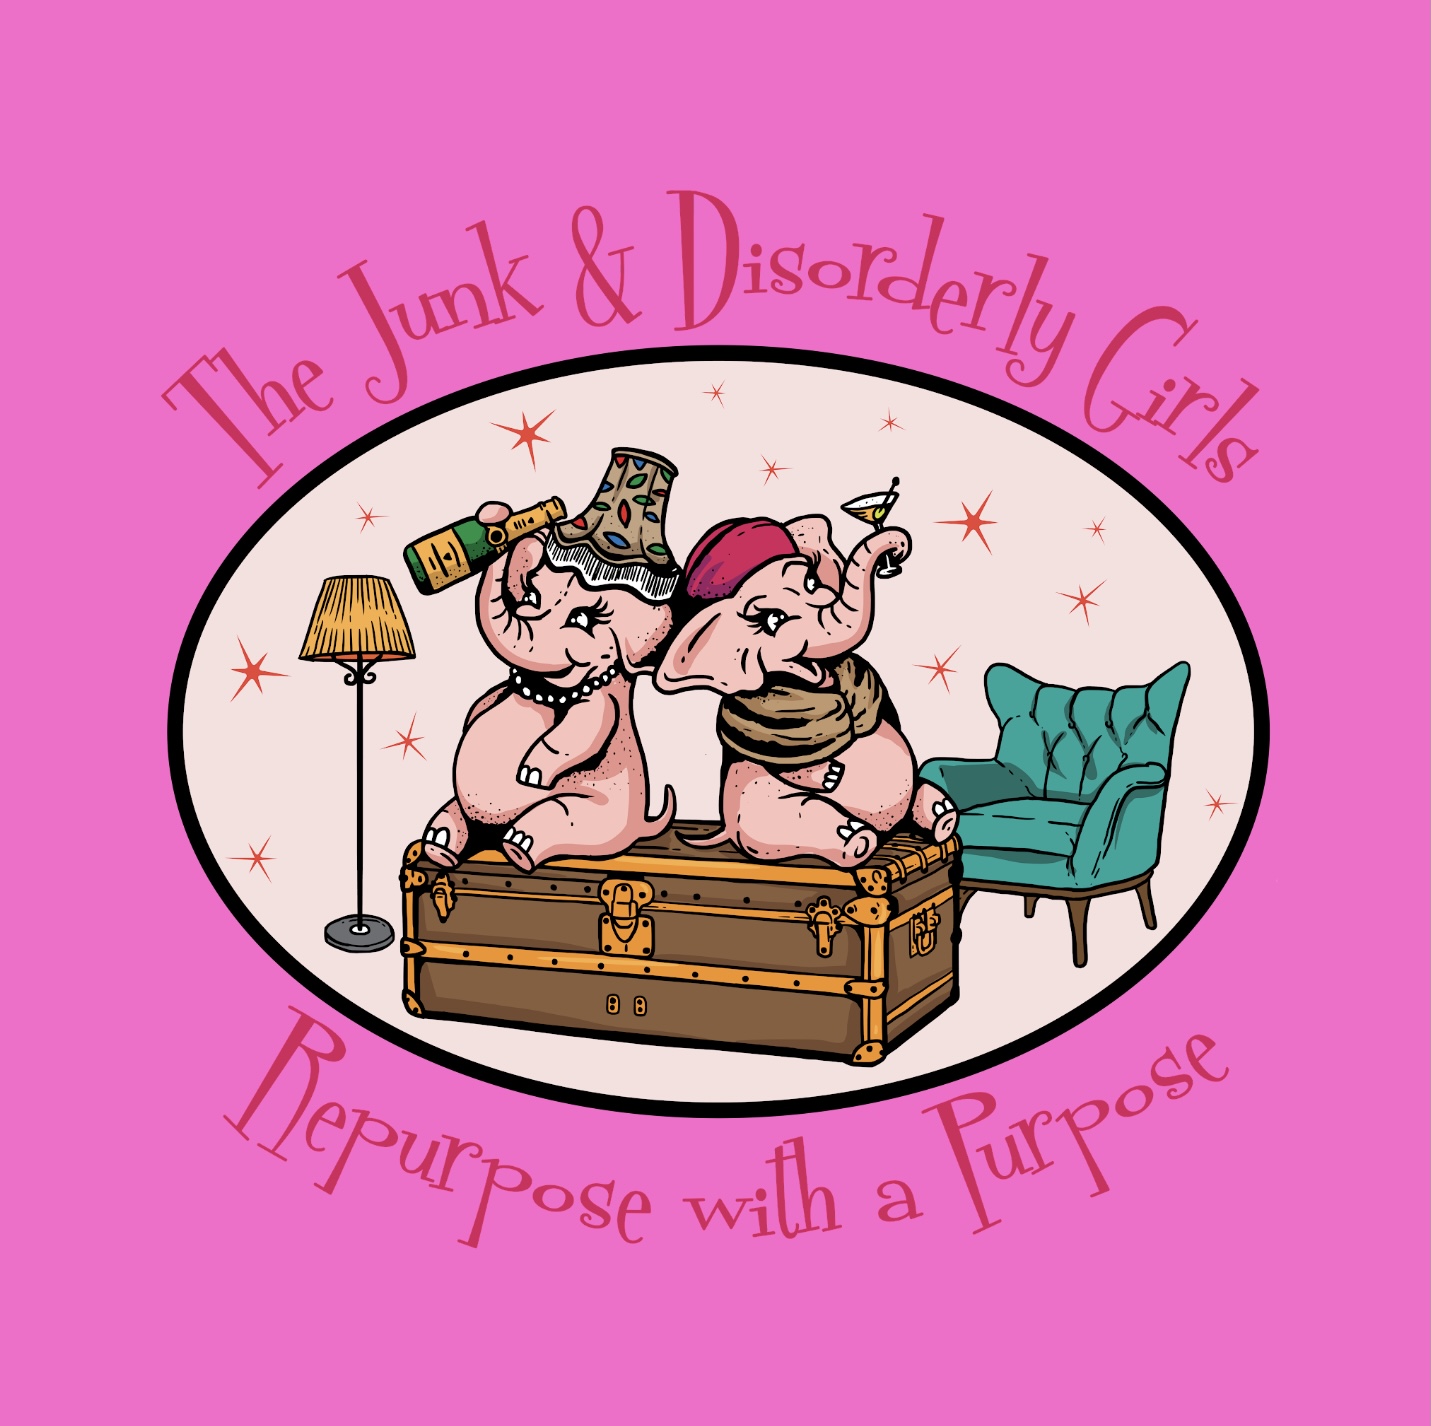 THE JUNK AND DISORDERLY GIRLS | AuctionNinja